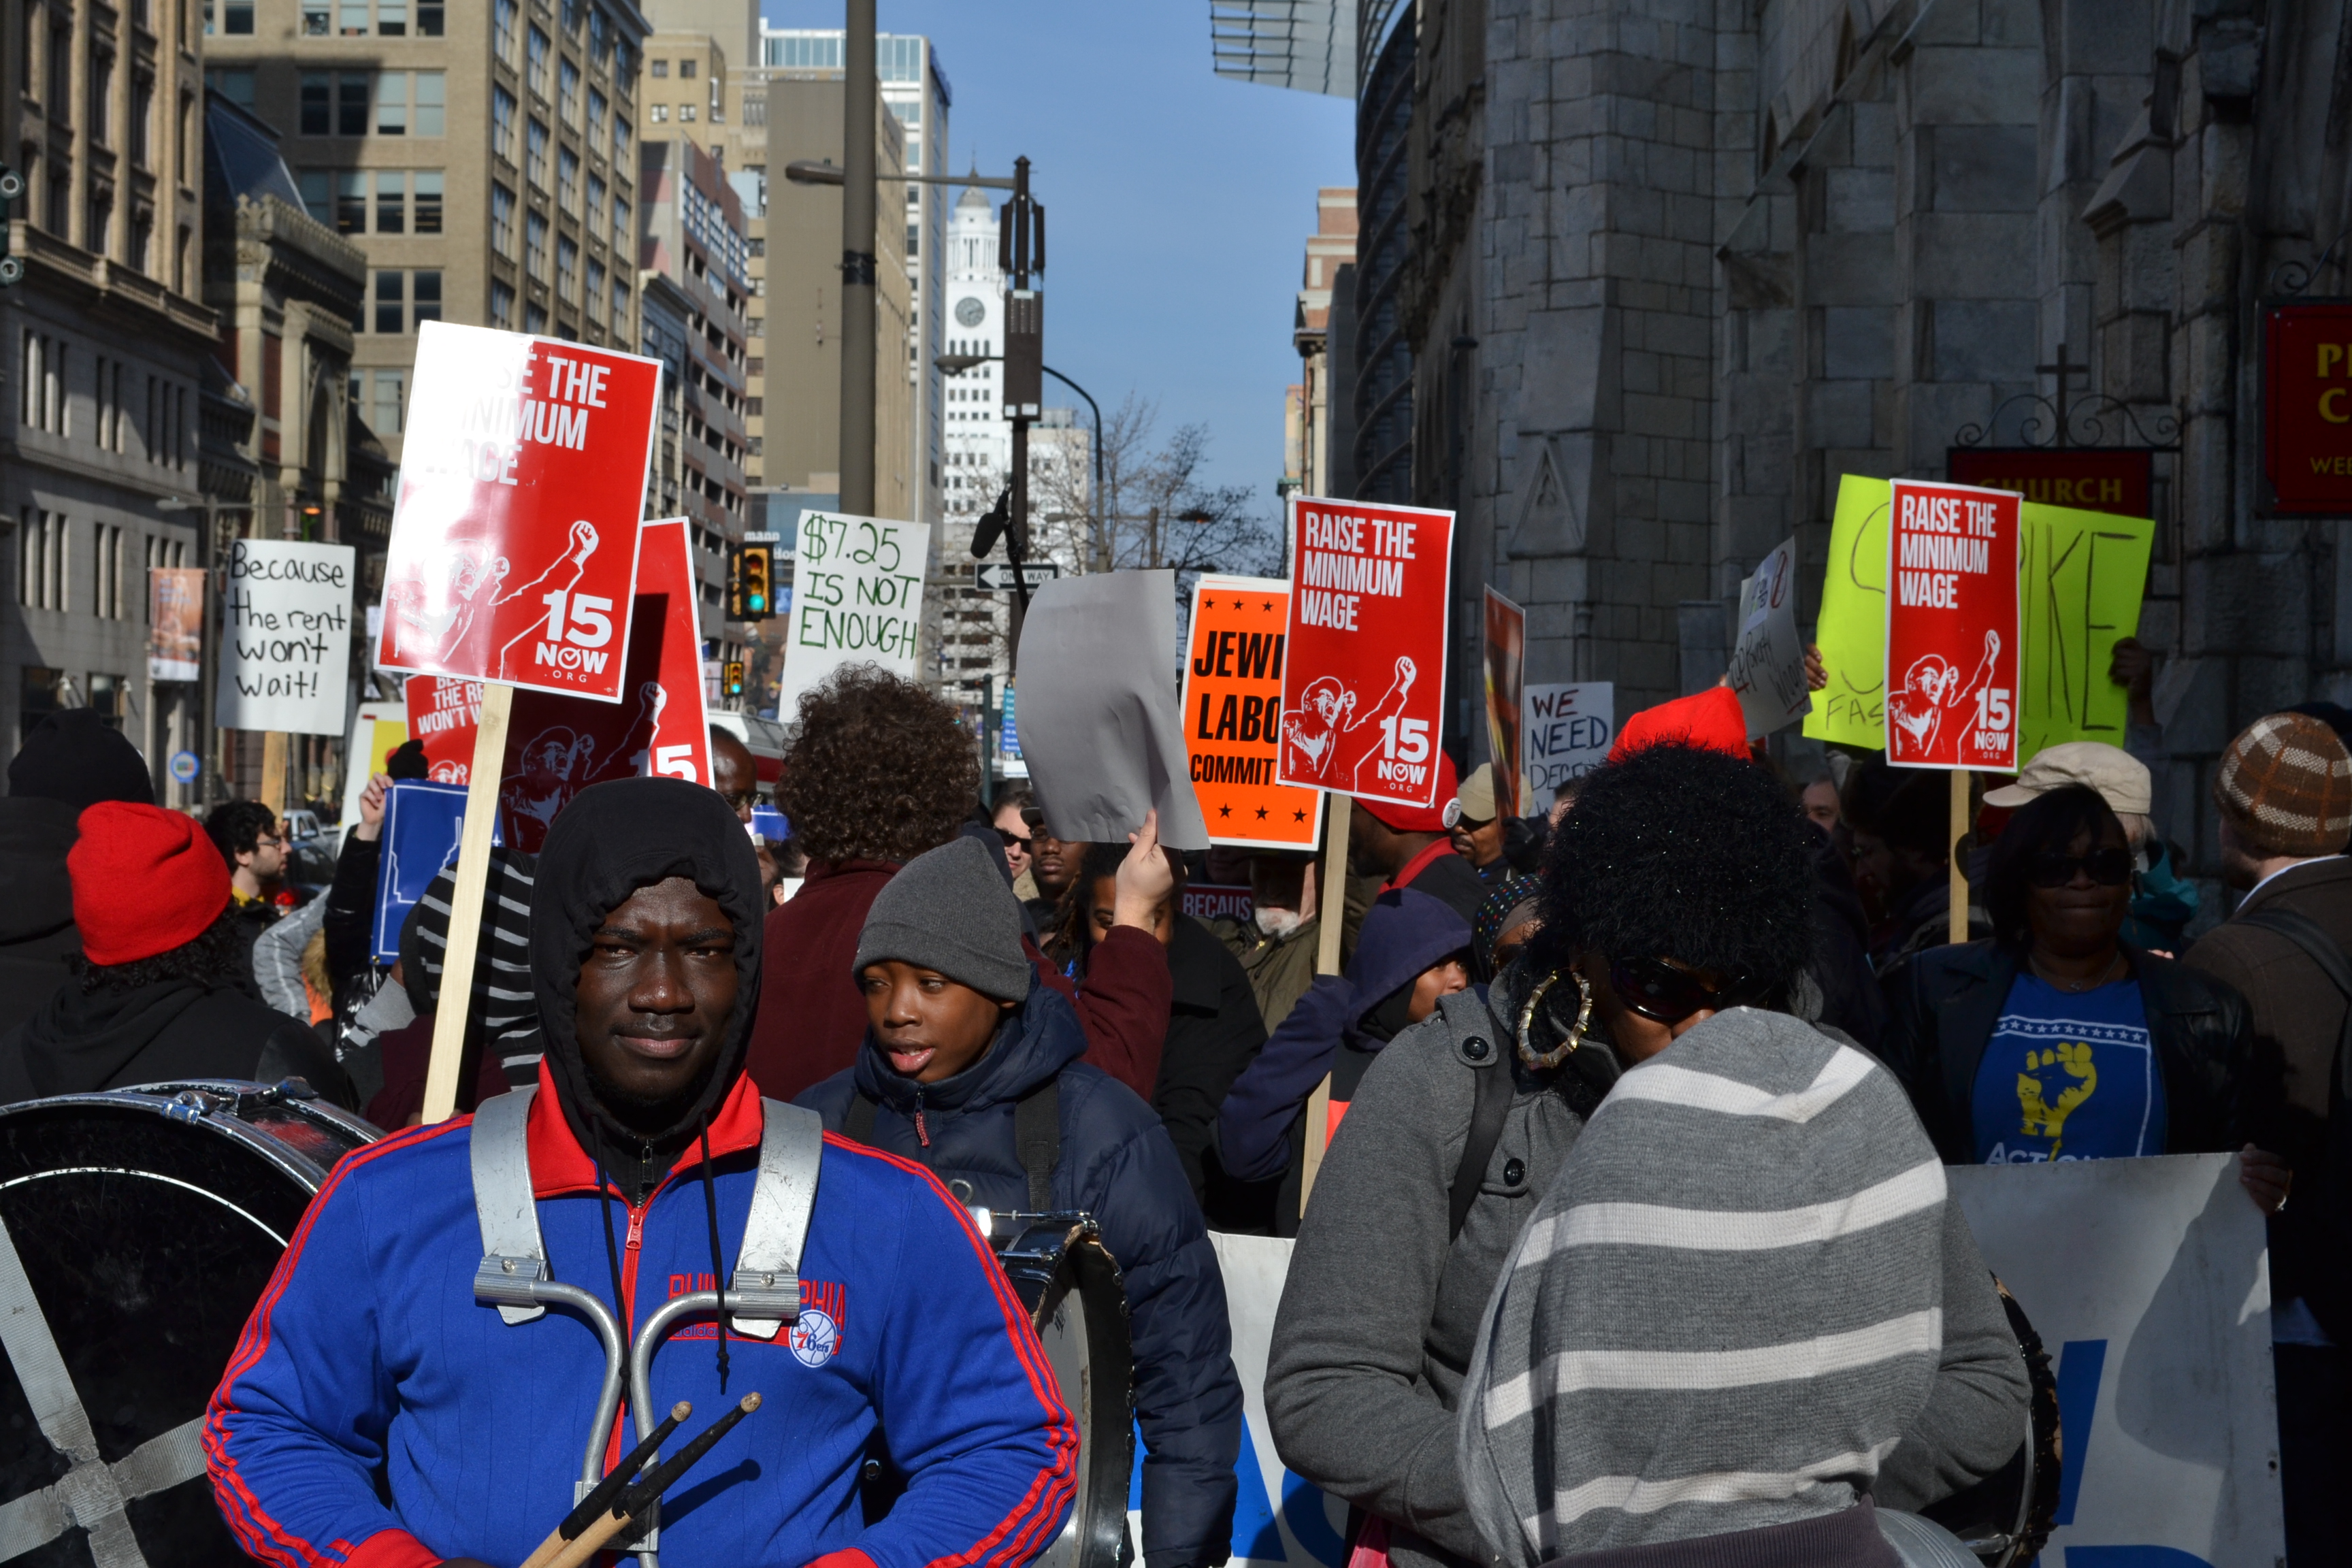 Marching for a Living Wage - December 2014